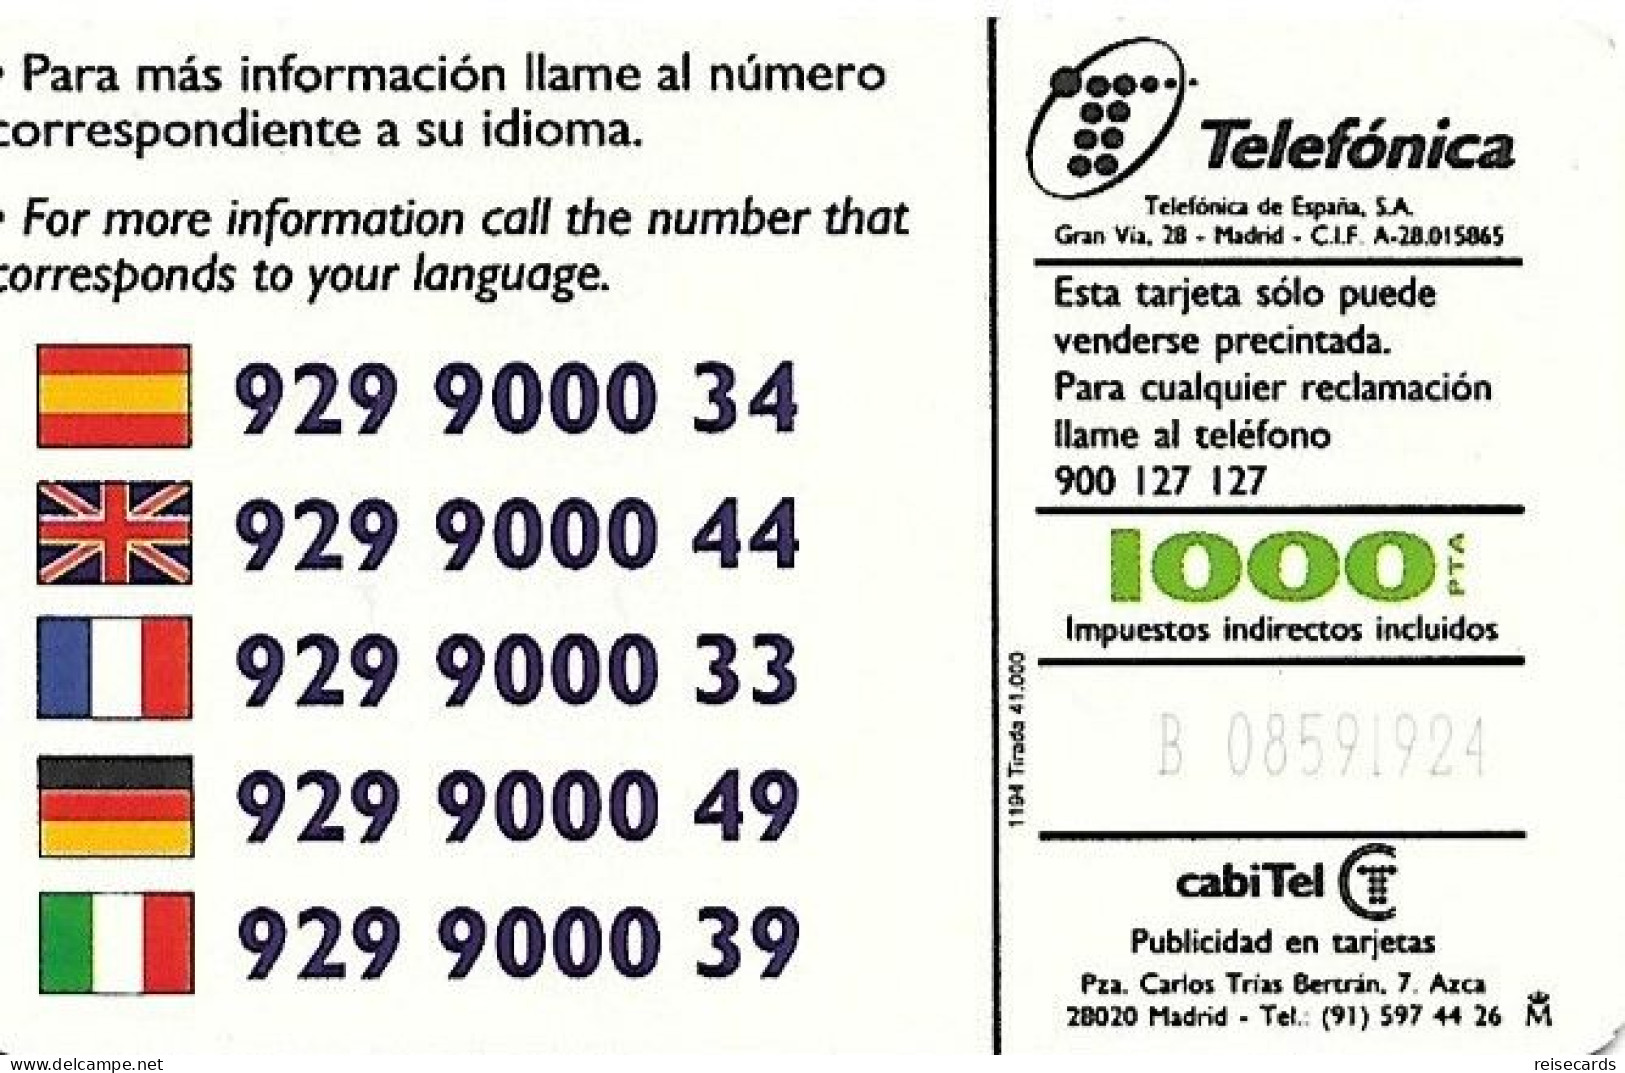 Spain: Telefonica - 1994 FonoBuzón - Private Issues